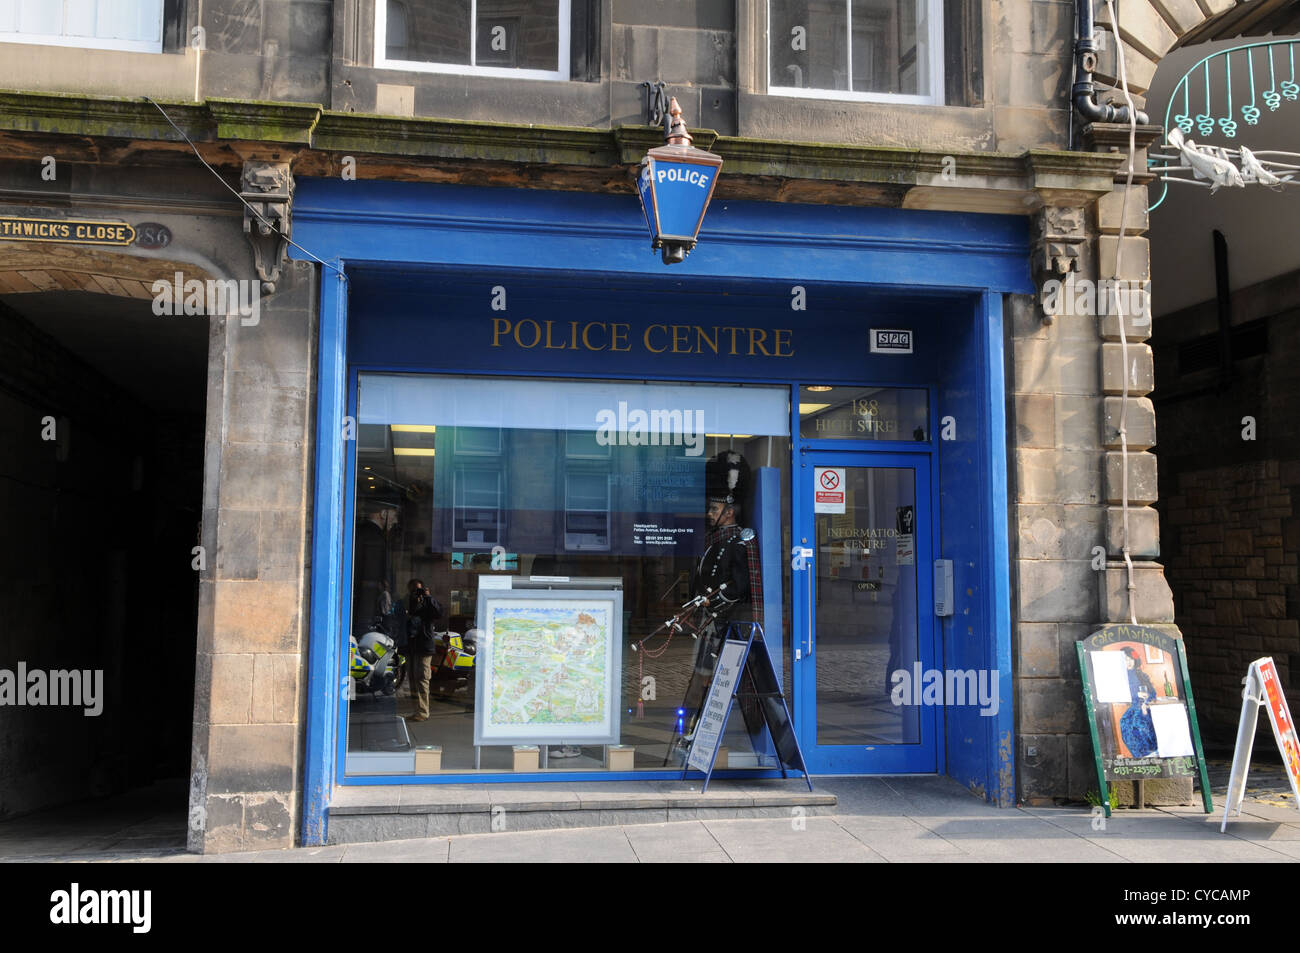 a Police Centre in the picturesque High street, Scotland Stock Photo